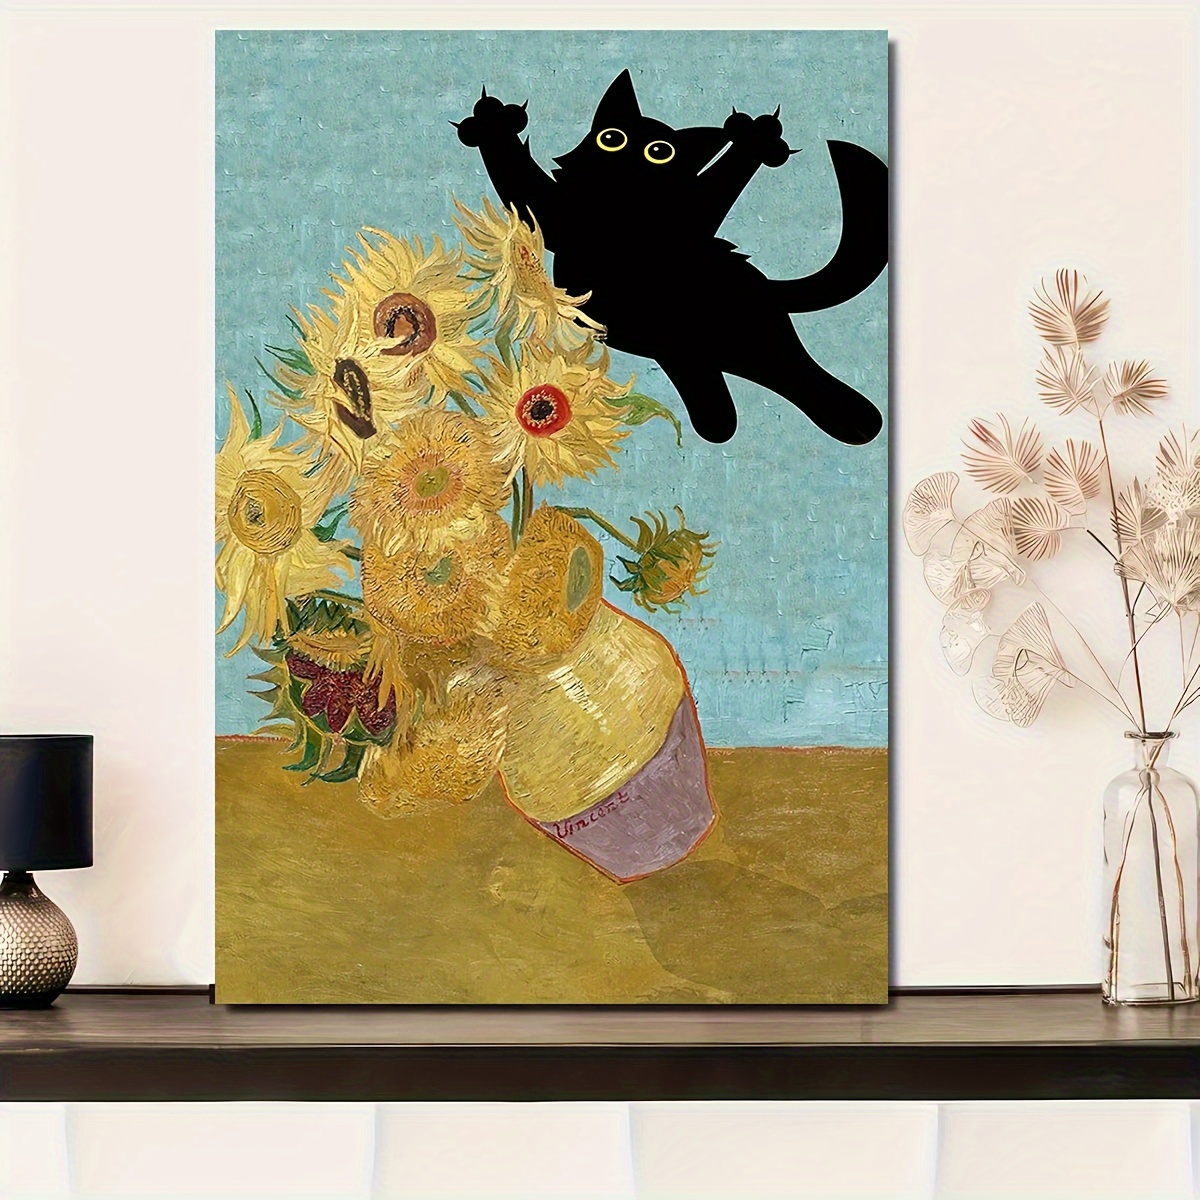 

Charming Cat & Sunflower Canvas Art Poster, 12x16" - Frameless Wall Decor For Home, Office, Cafe | Perfect For Bedroom, Living Room, Kitchen Cat Pictures Wall Decor